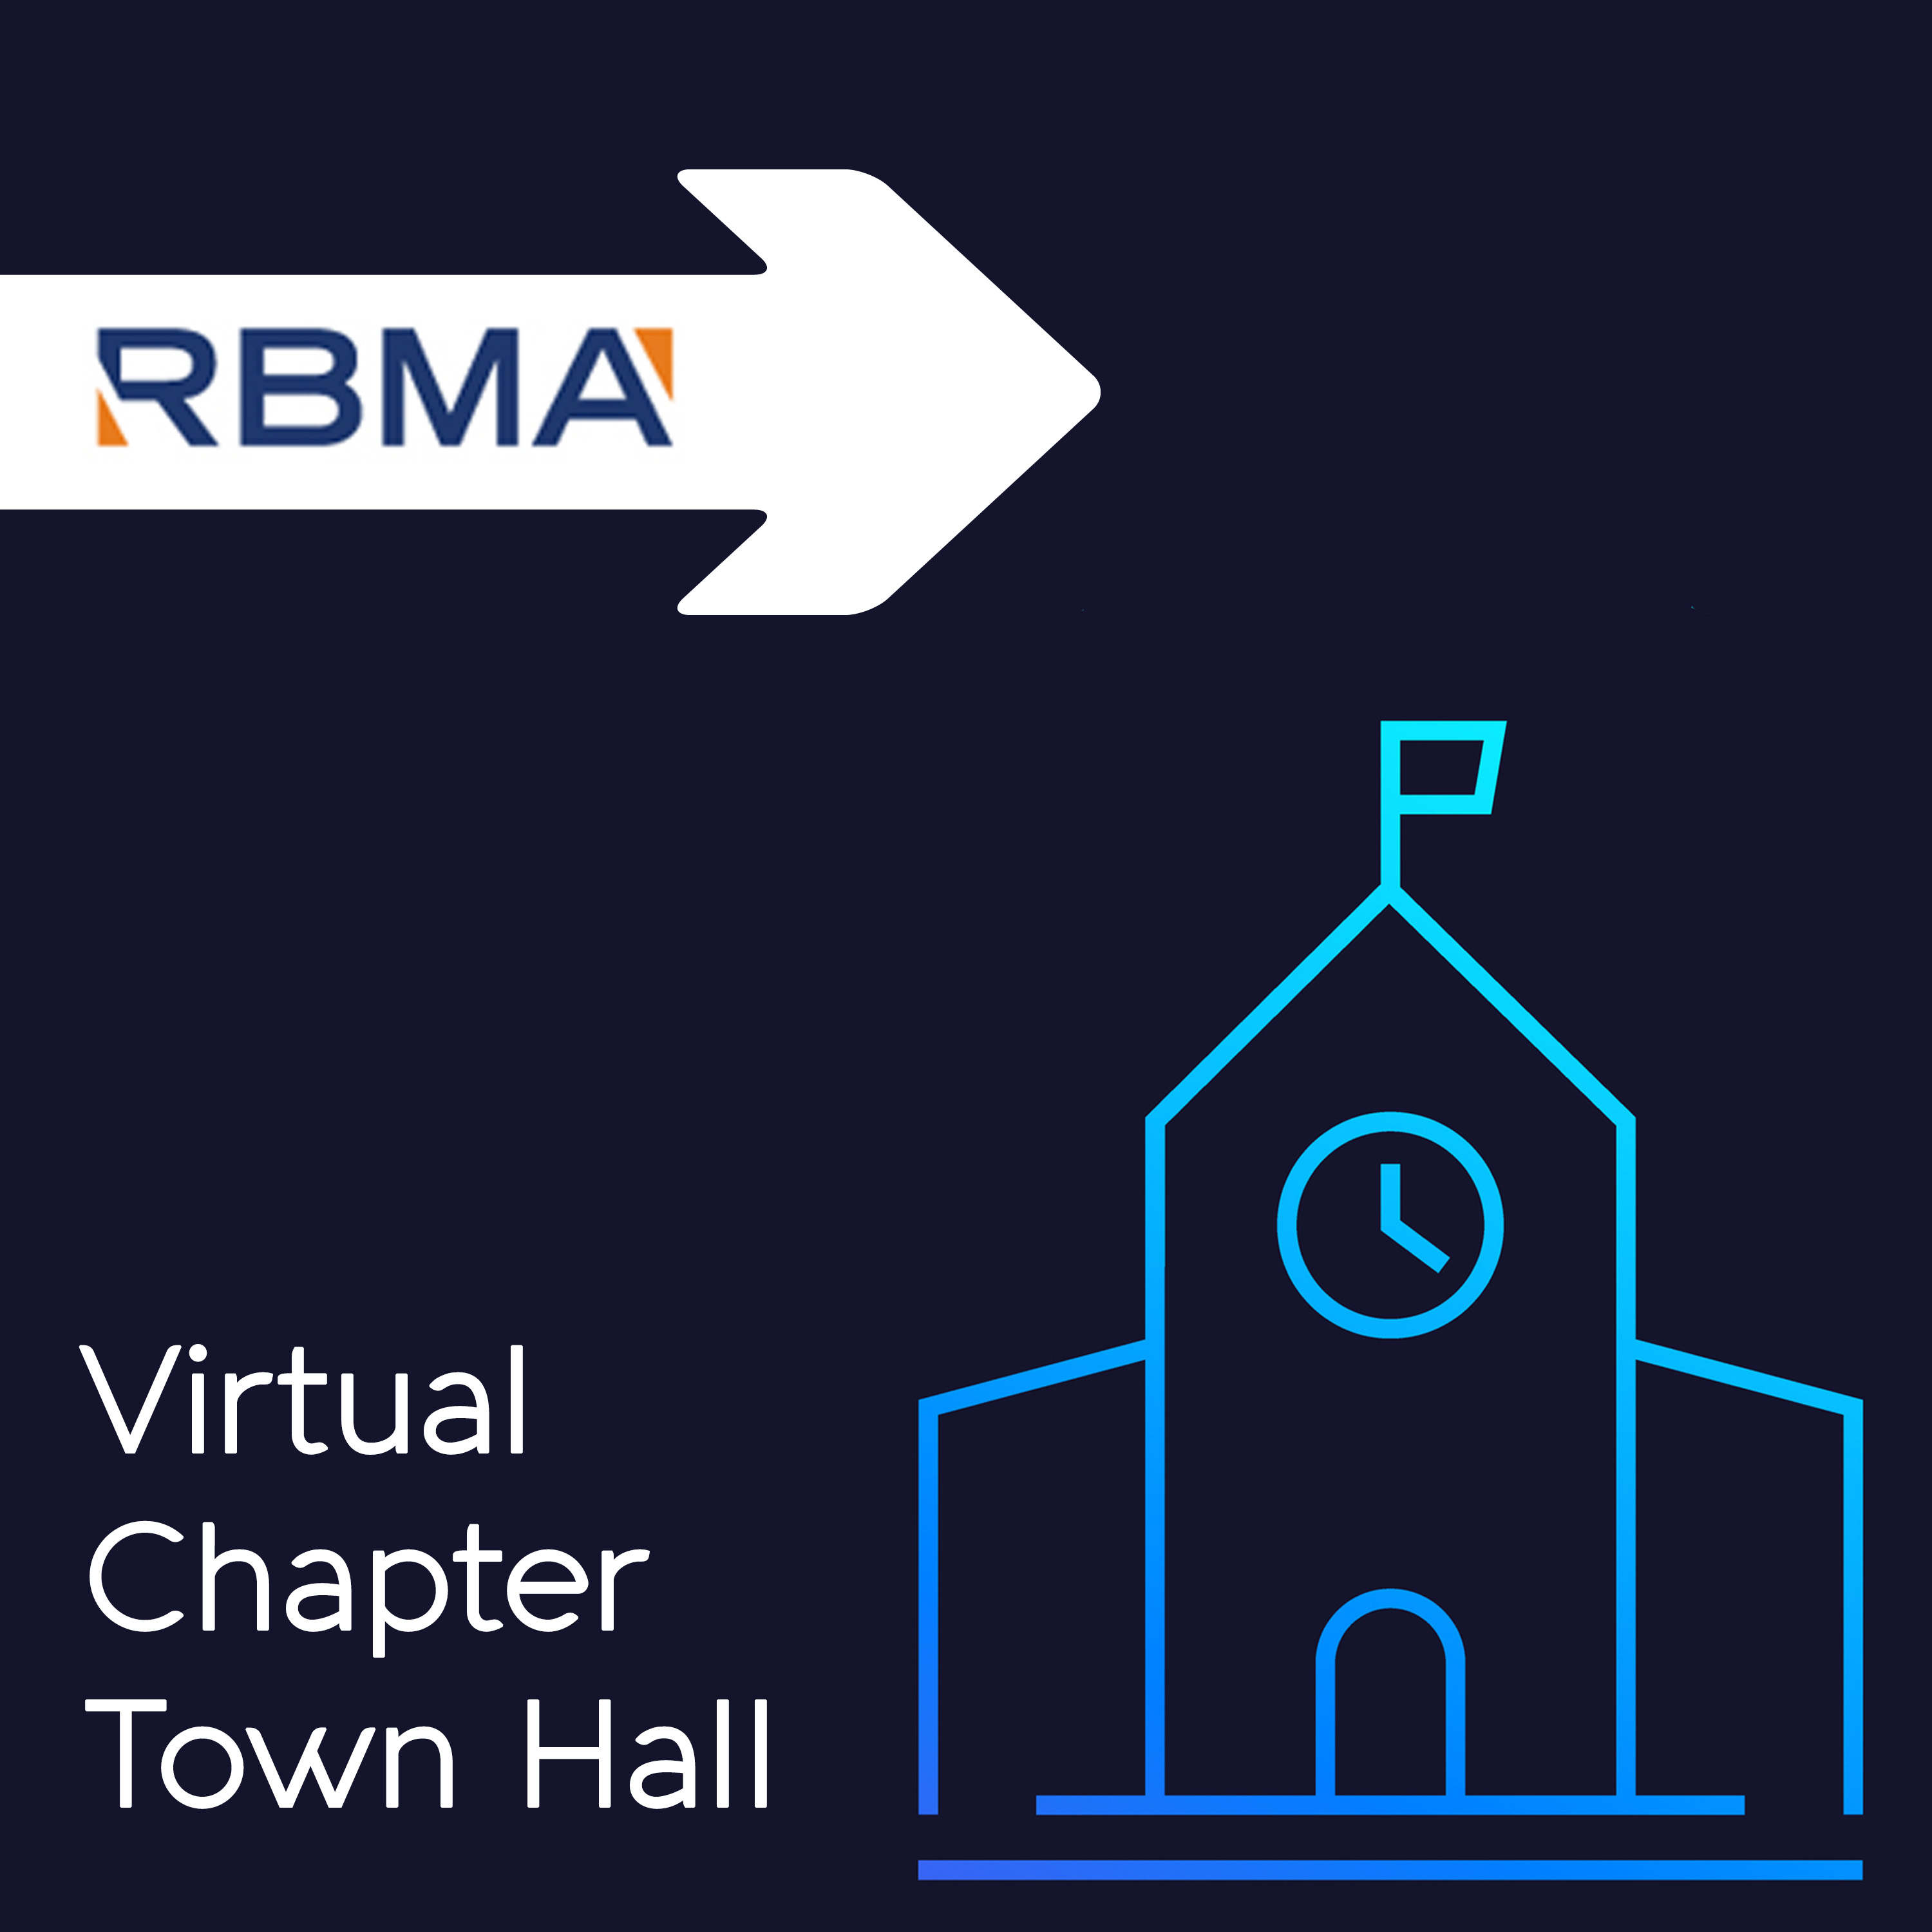 Northeast Virtual Chapter Town Hall